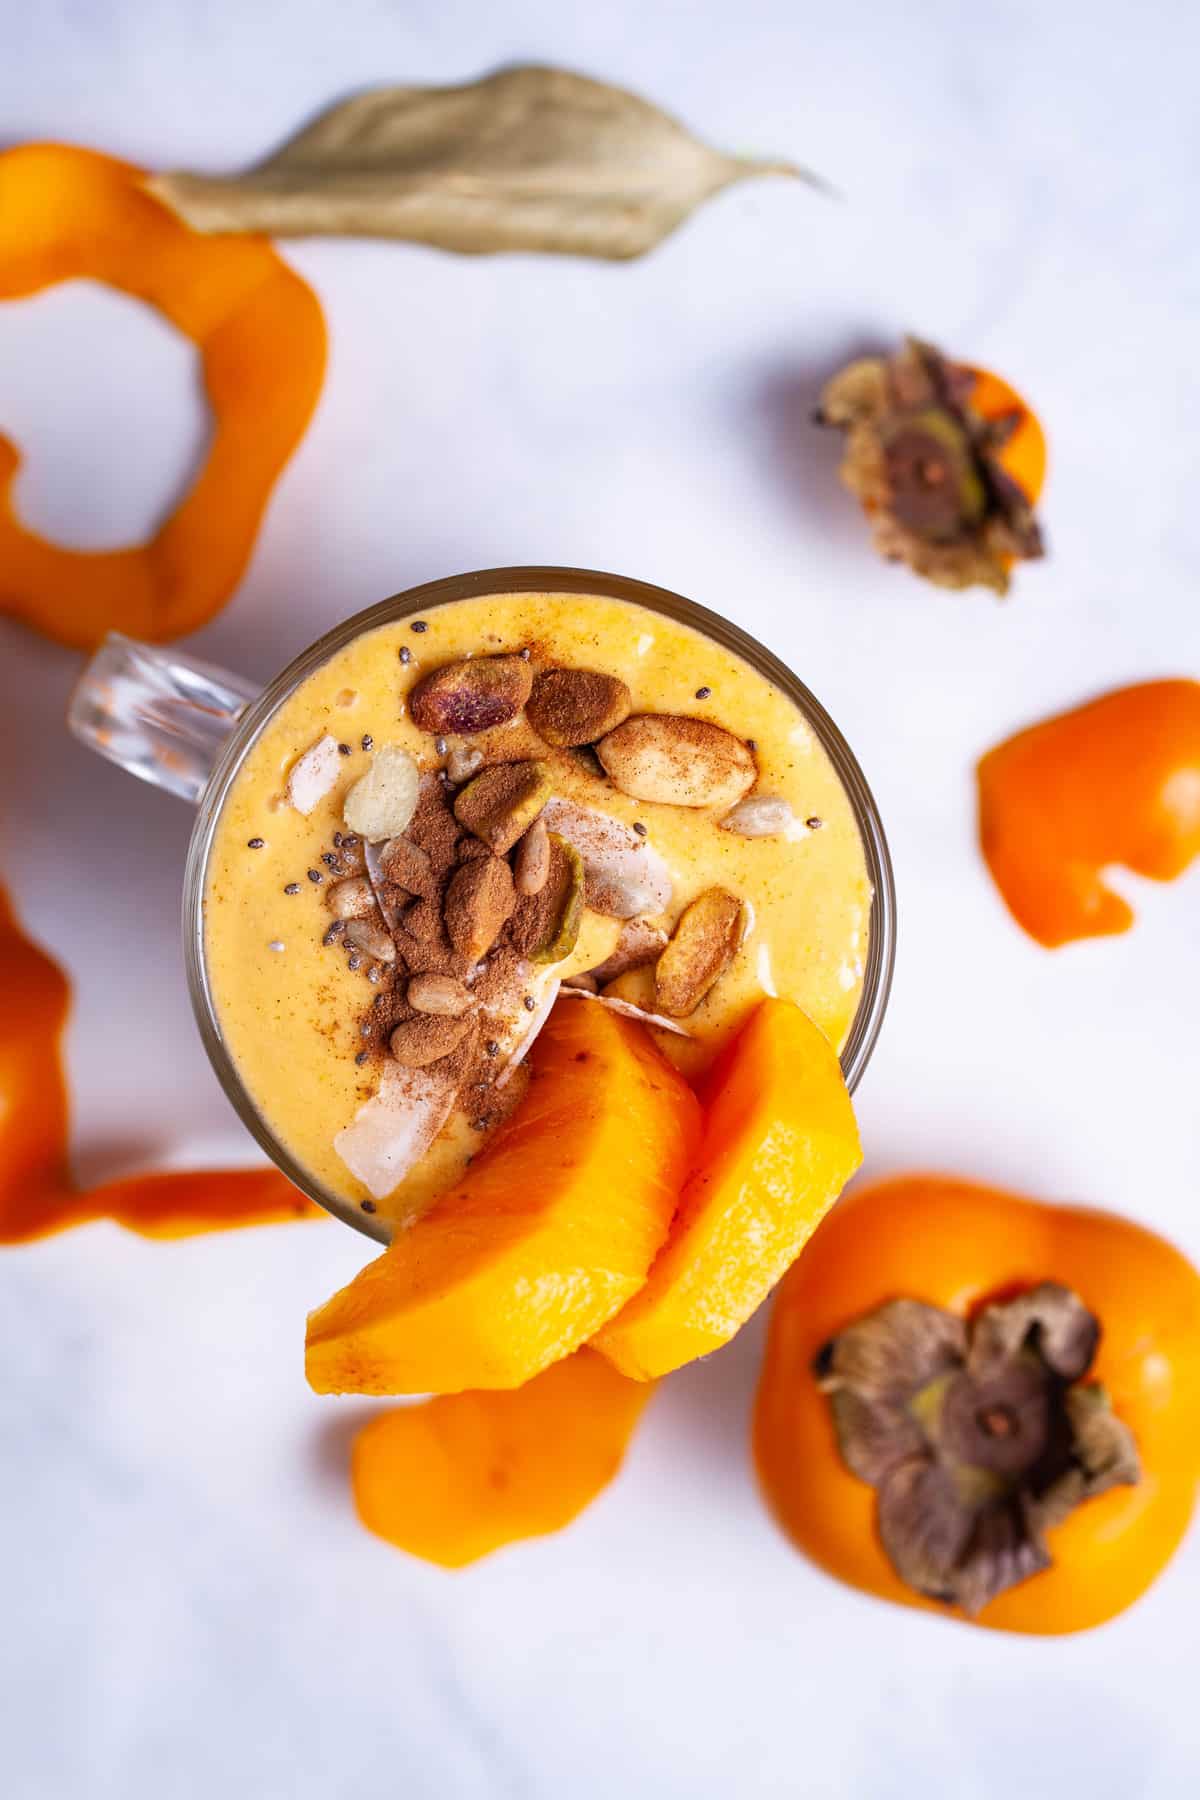 A persimmon smoothie topped with cinnamon, nuts, and garnished with fresh persimmon slices.